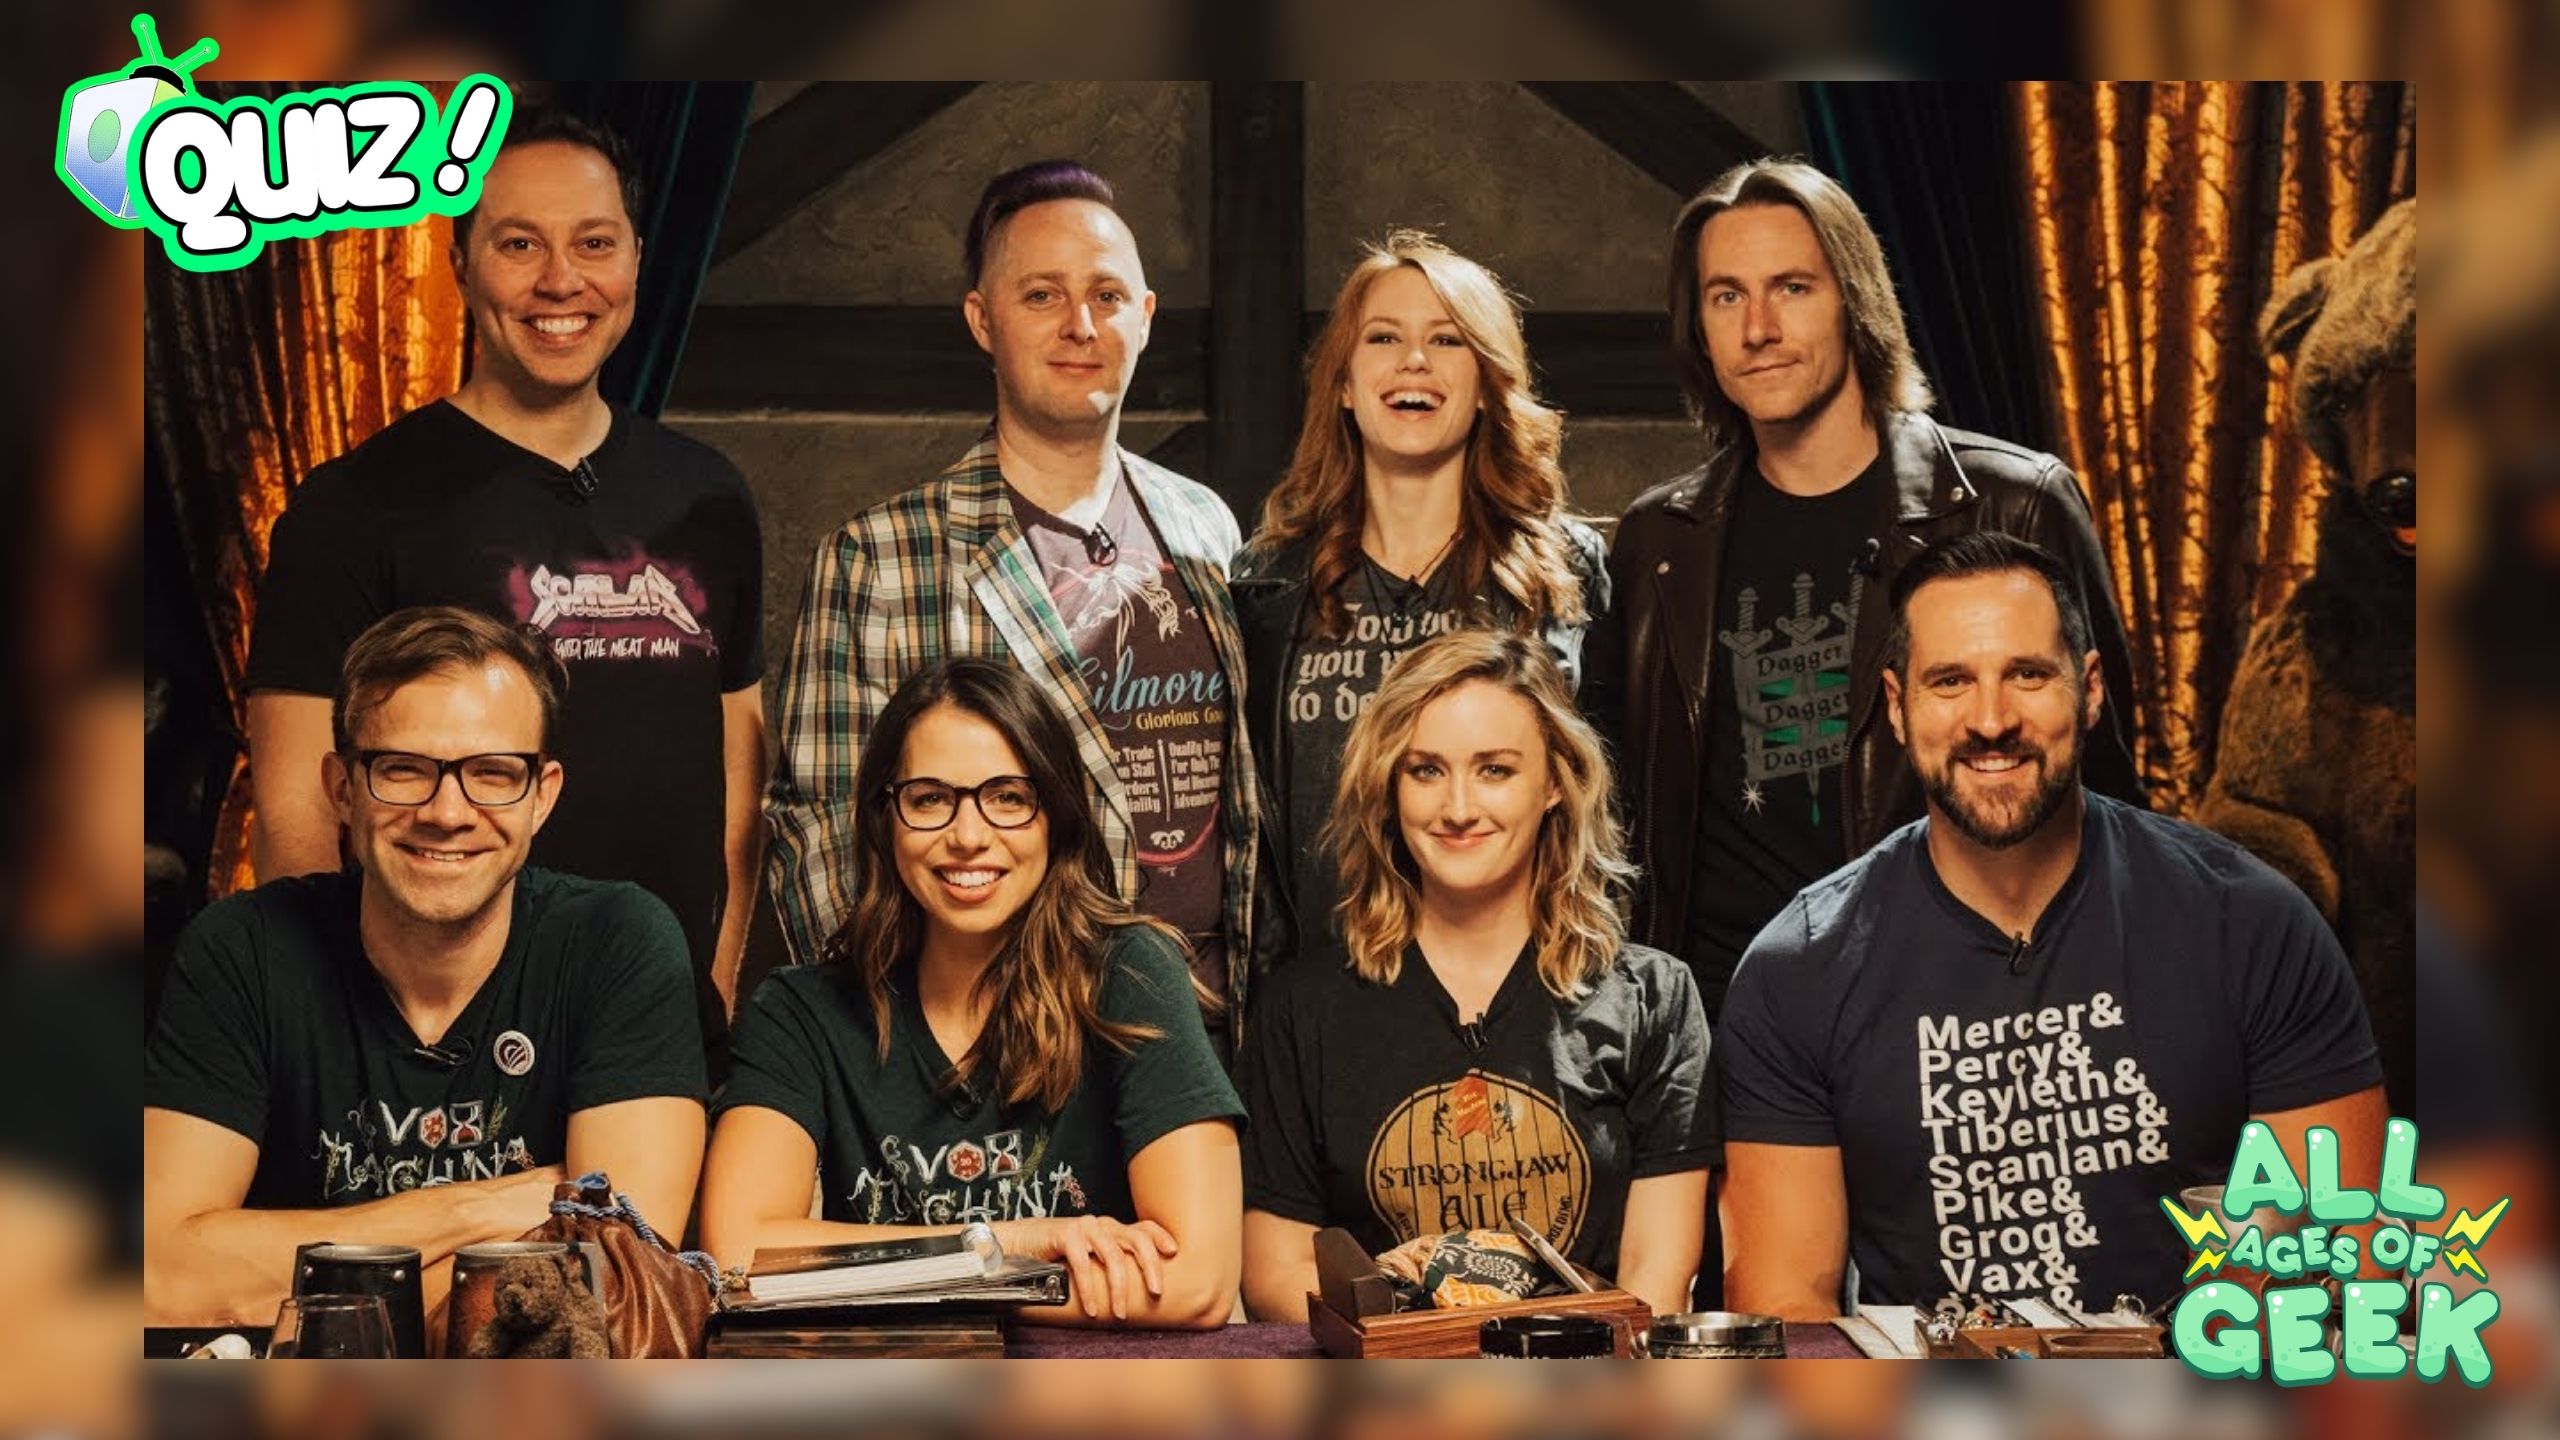 Which “Critical Role” Cast Member Are You? Take the Quiz to Find Out!